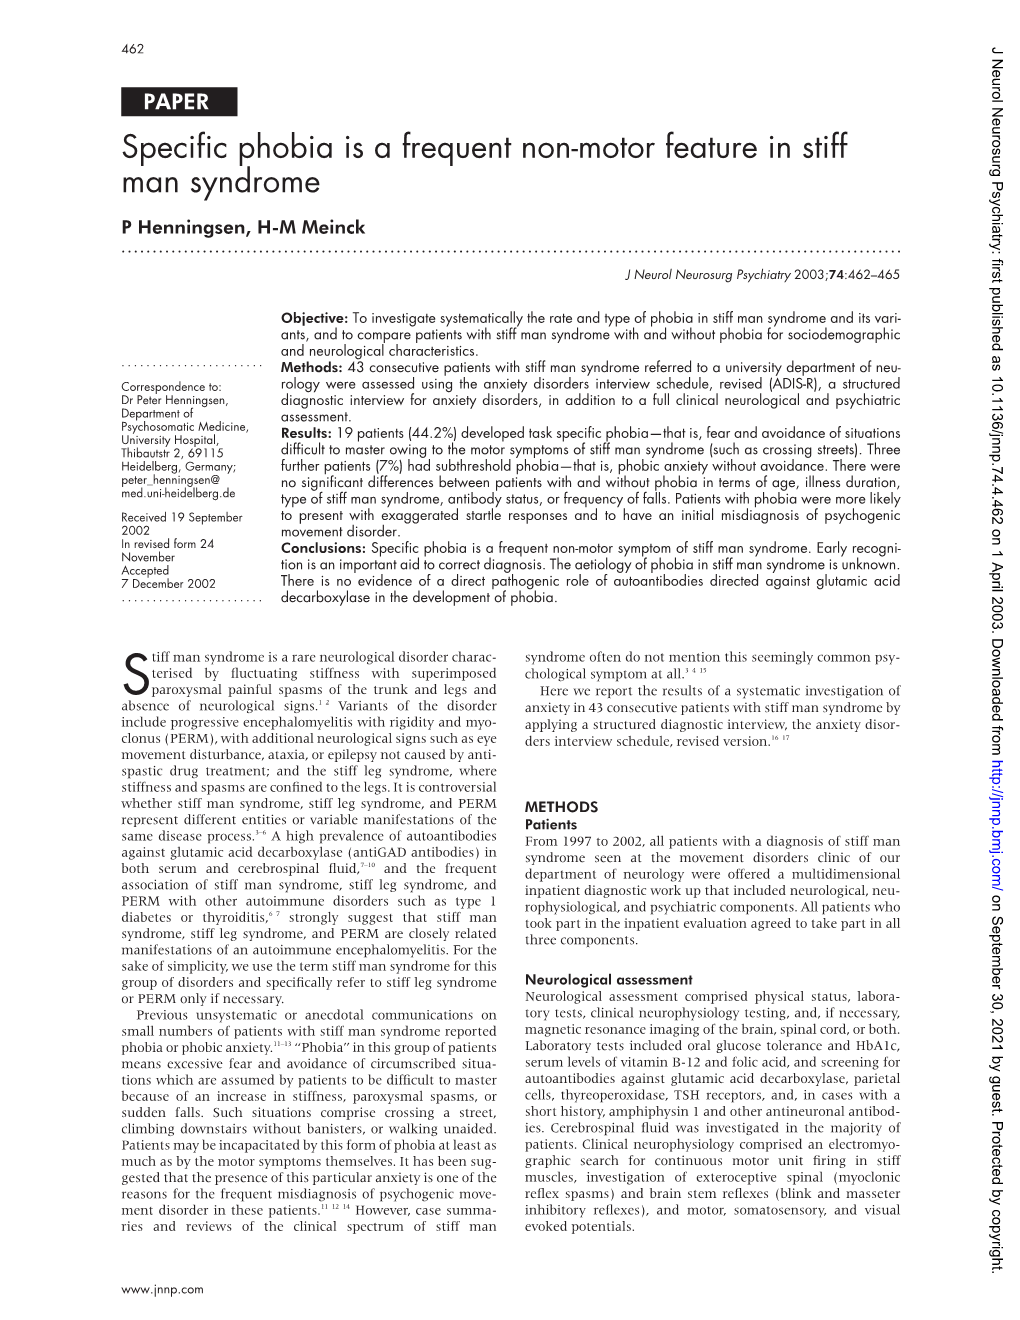 Specific Phobia Is a Frequent Non-Motor Feature in Stiff Man Syndrome P Henningsen, H-M Meinck